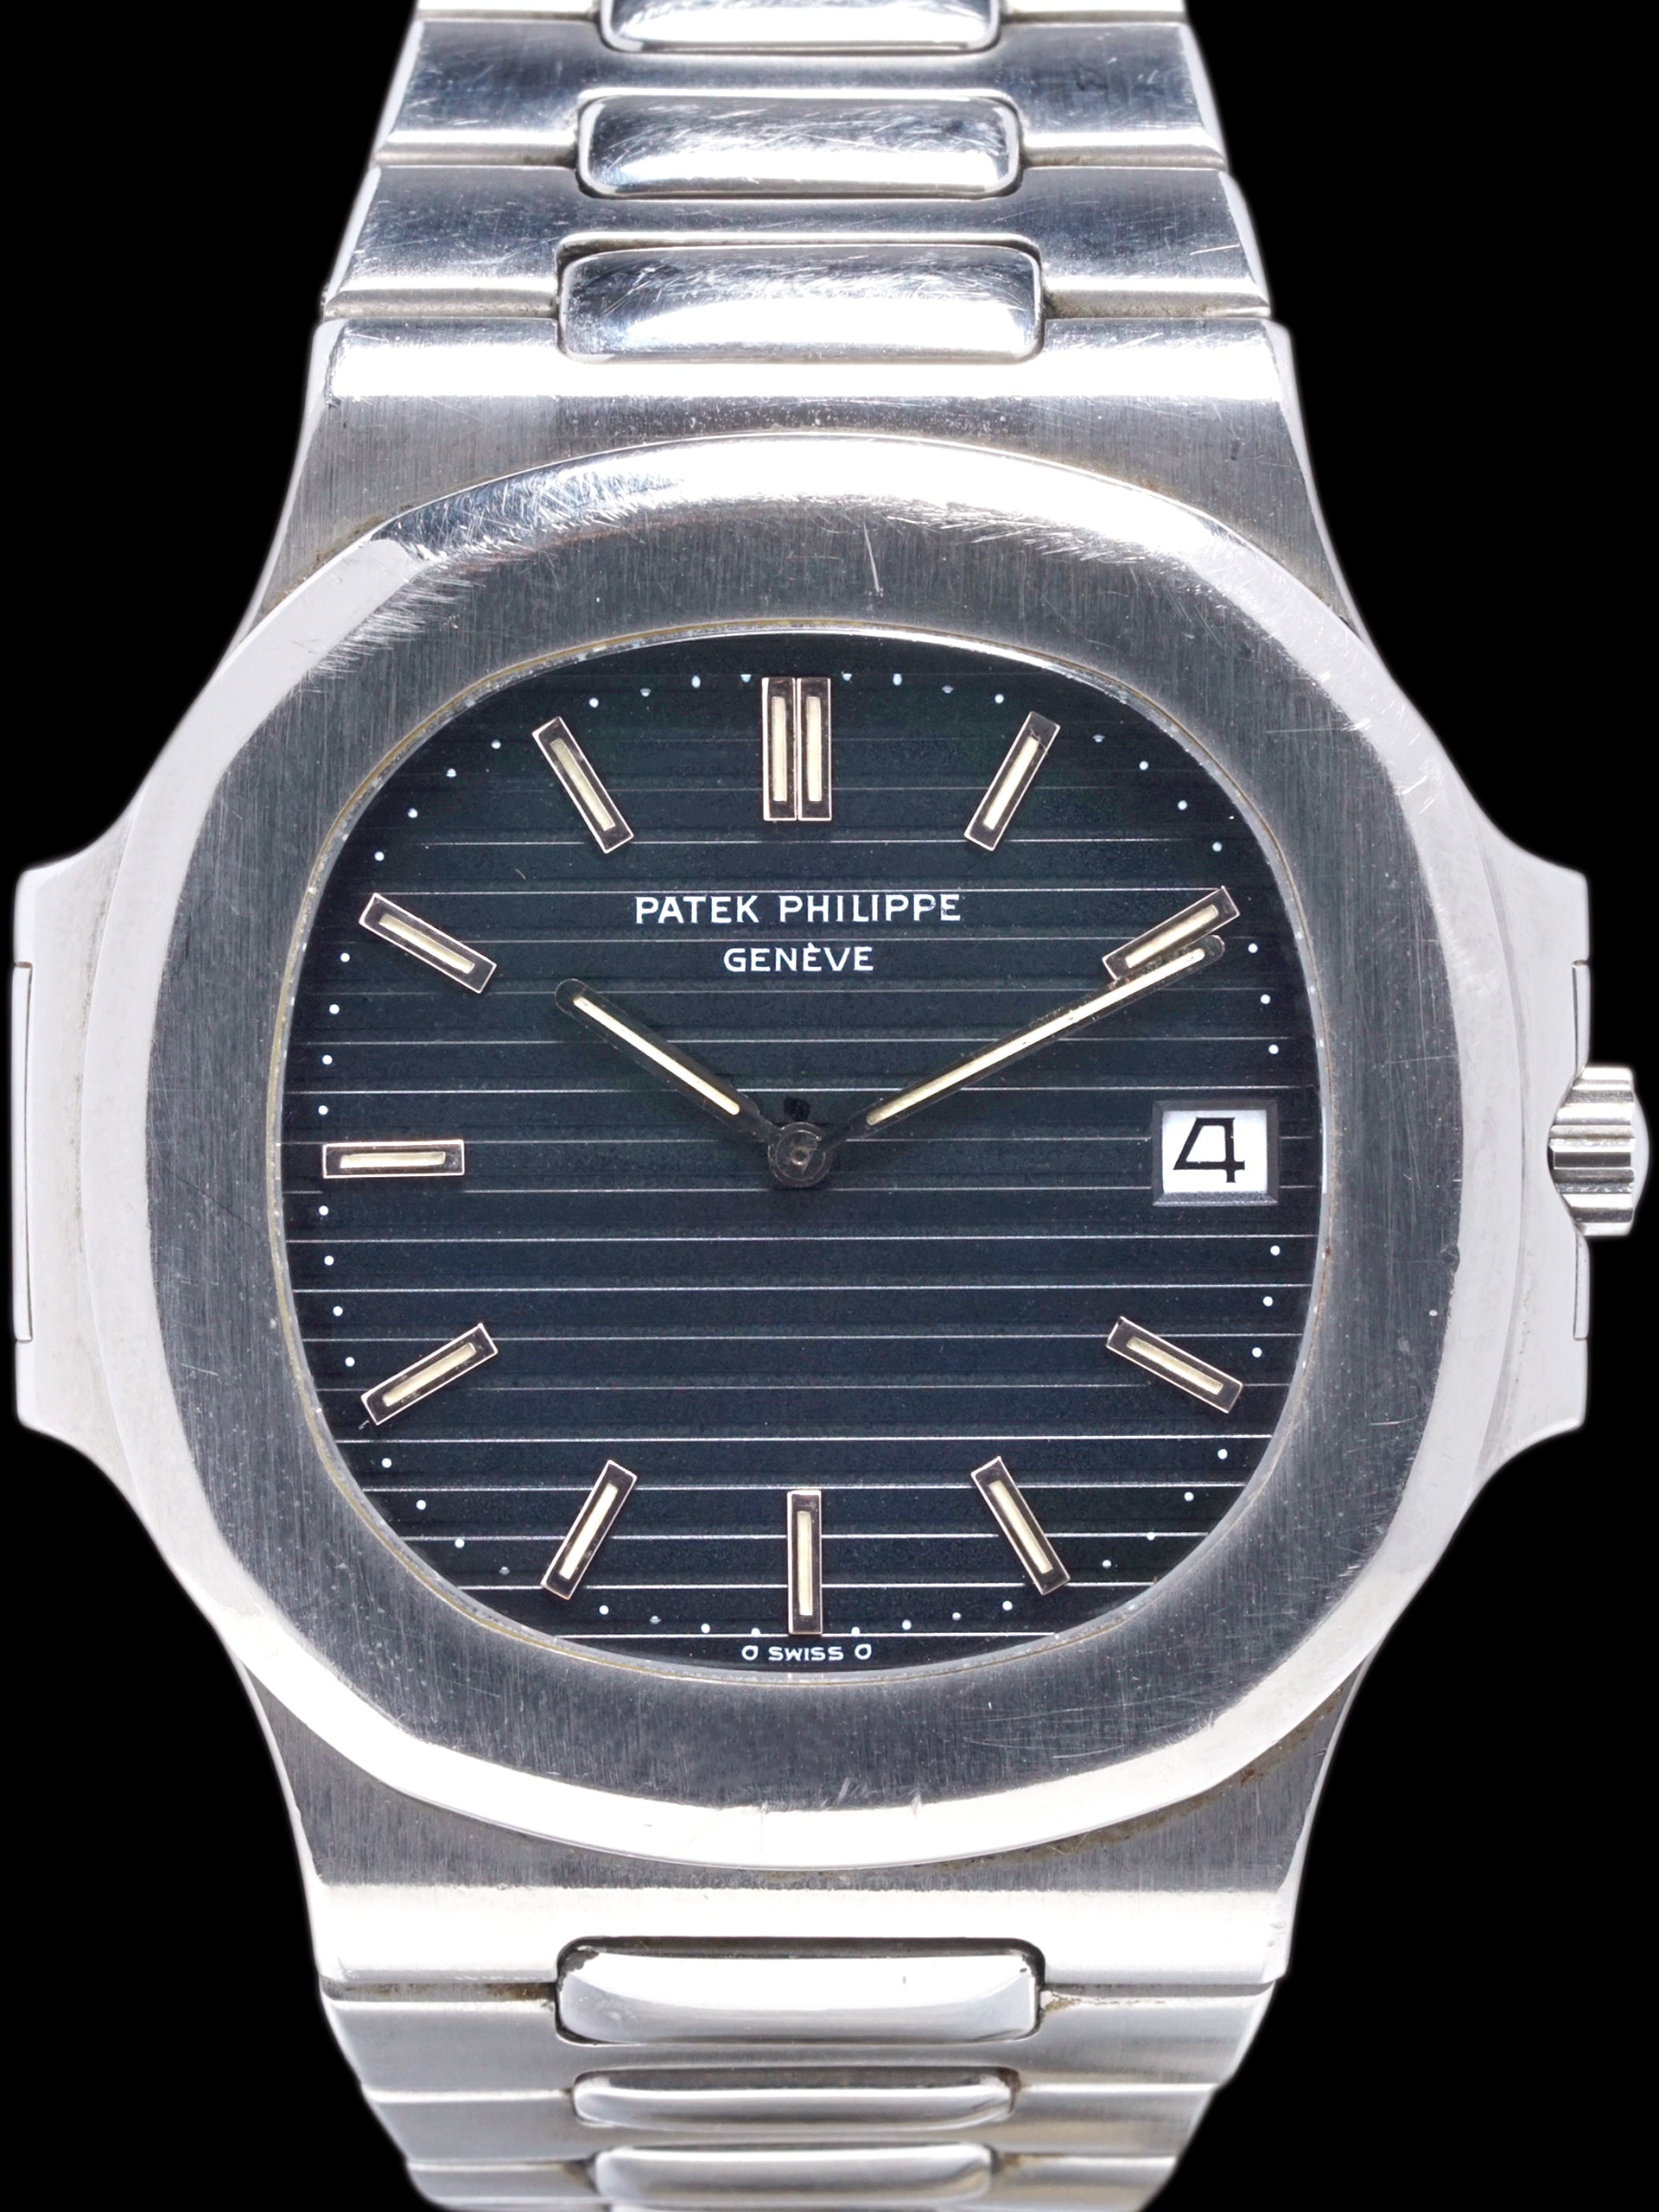 *One Owner* 1978 Patek Philippe Nautilus "Jumbo" (Ref. 3700/1) W/ Box, Papers, and Sales Receipt